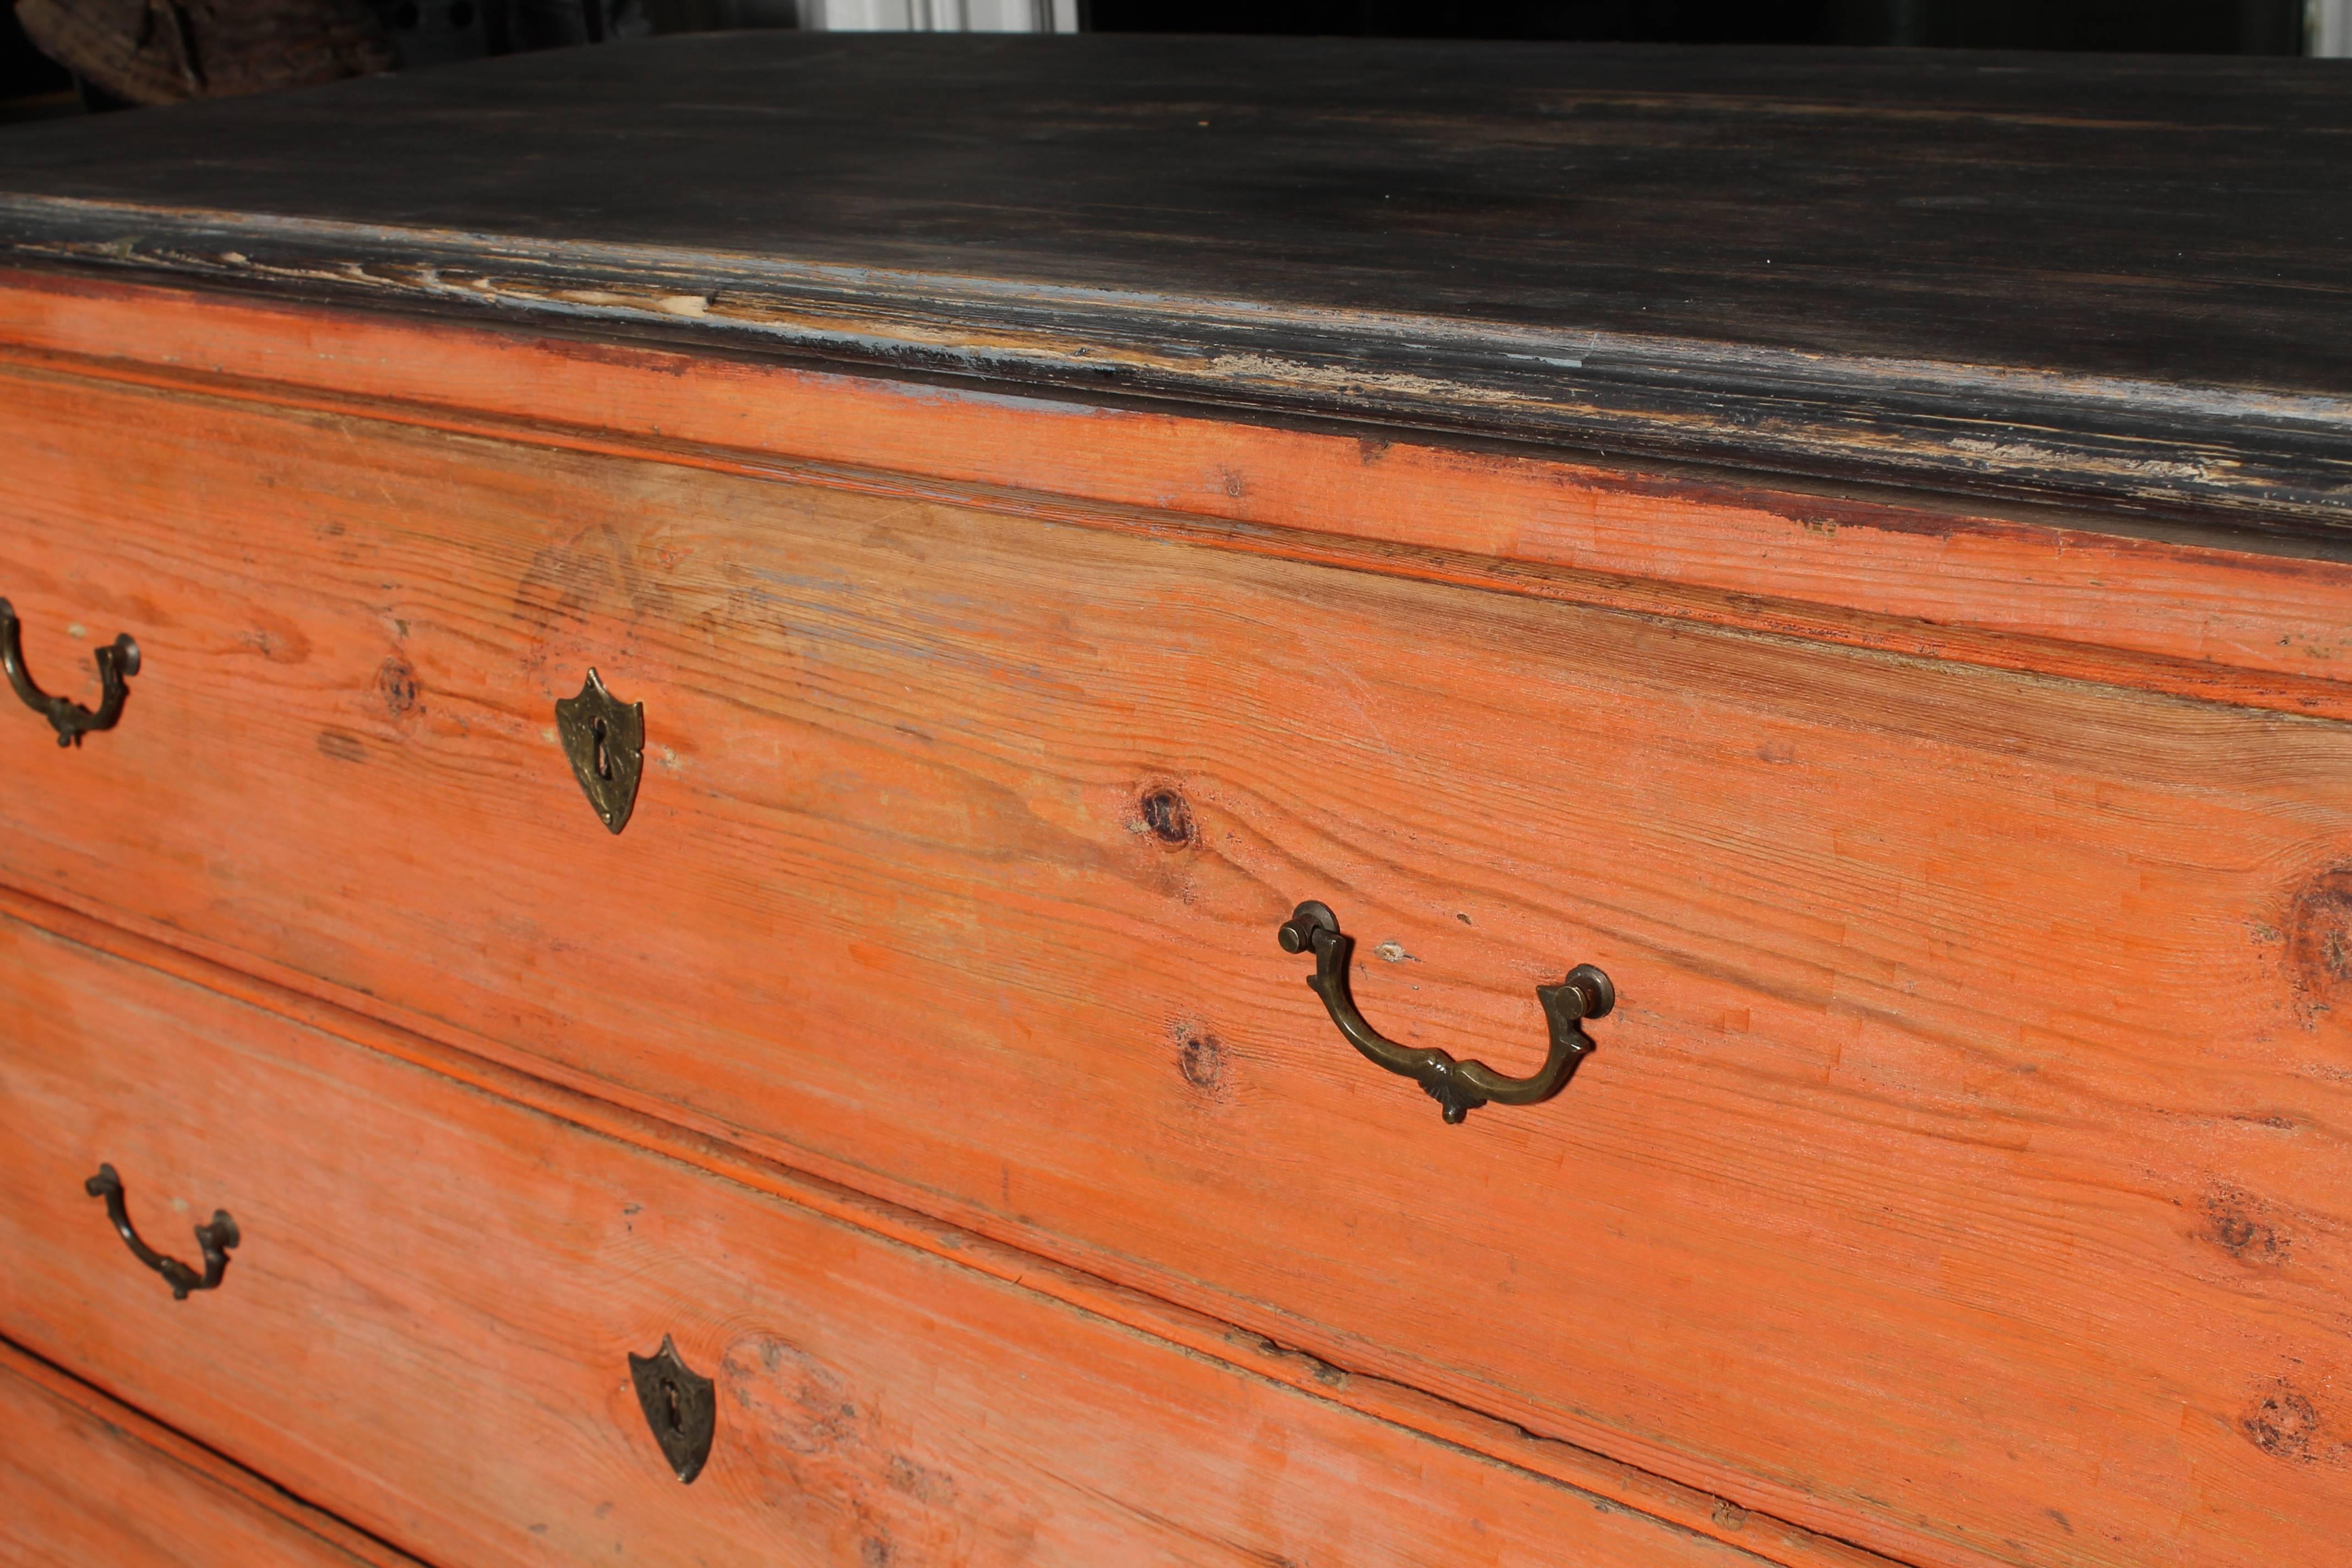 19th century Swedish chest of drawers, orange and black repainting, three drawers. Extraordinary painting which is typical for northern part of Sweden.